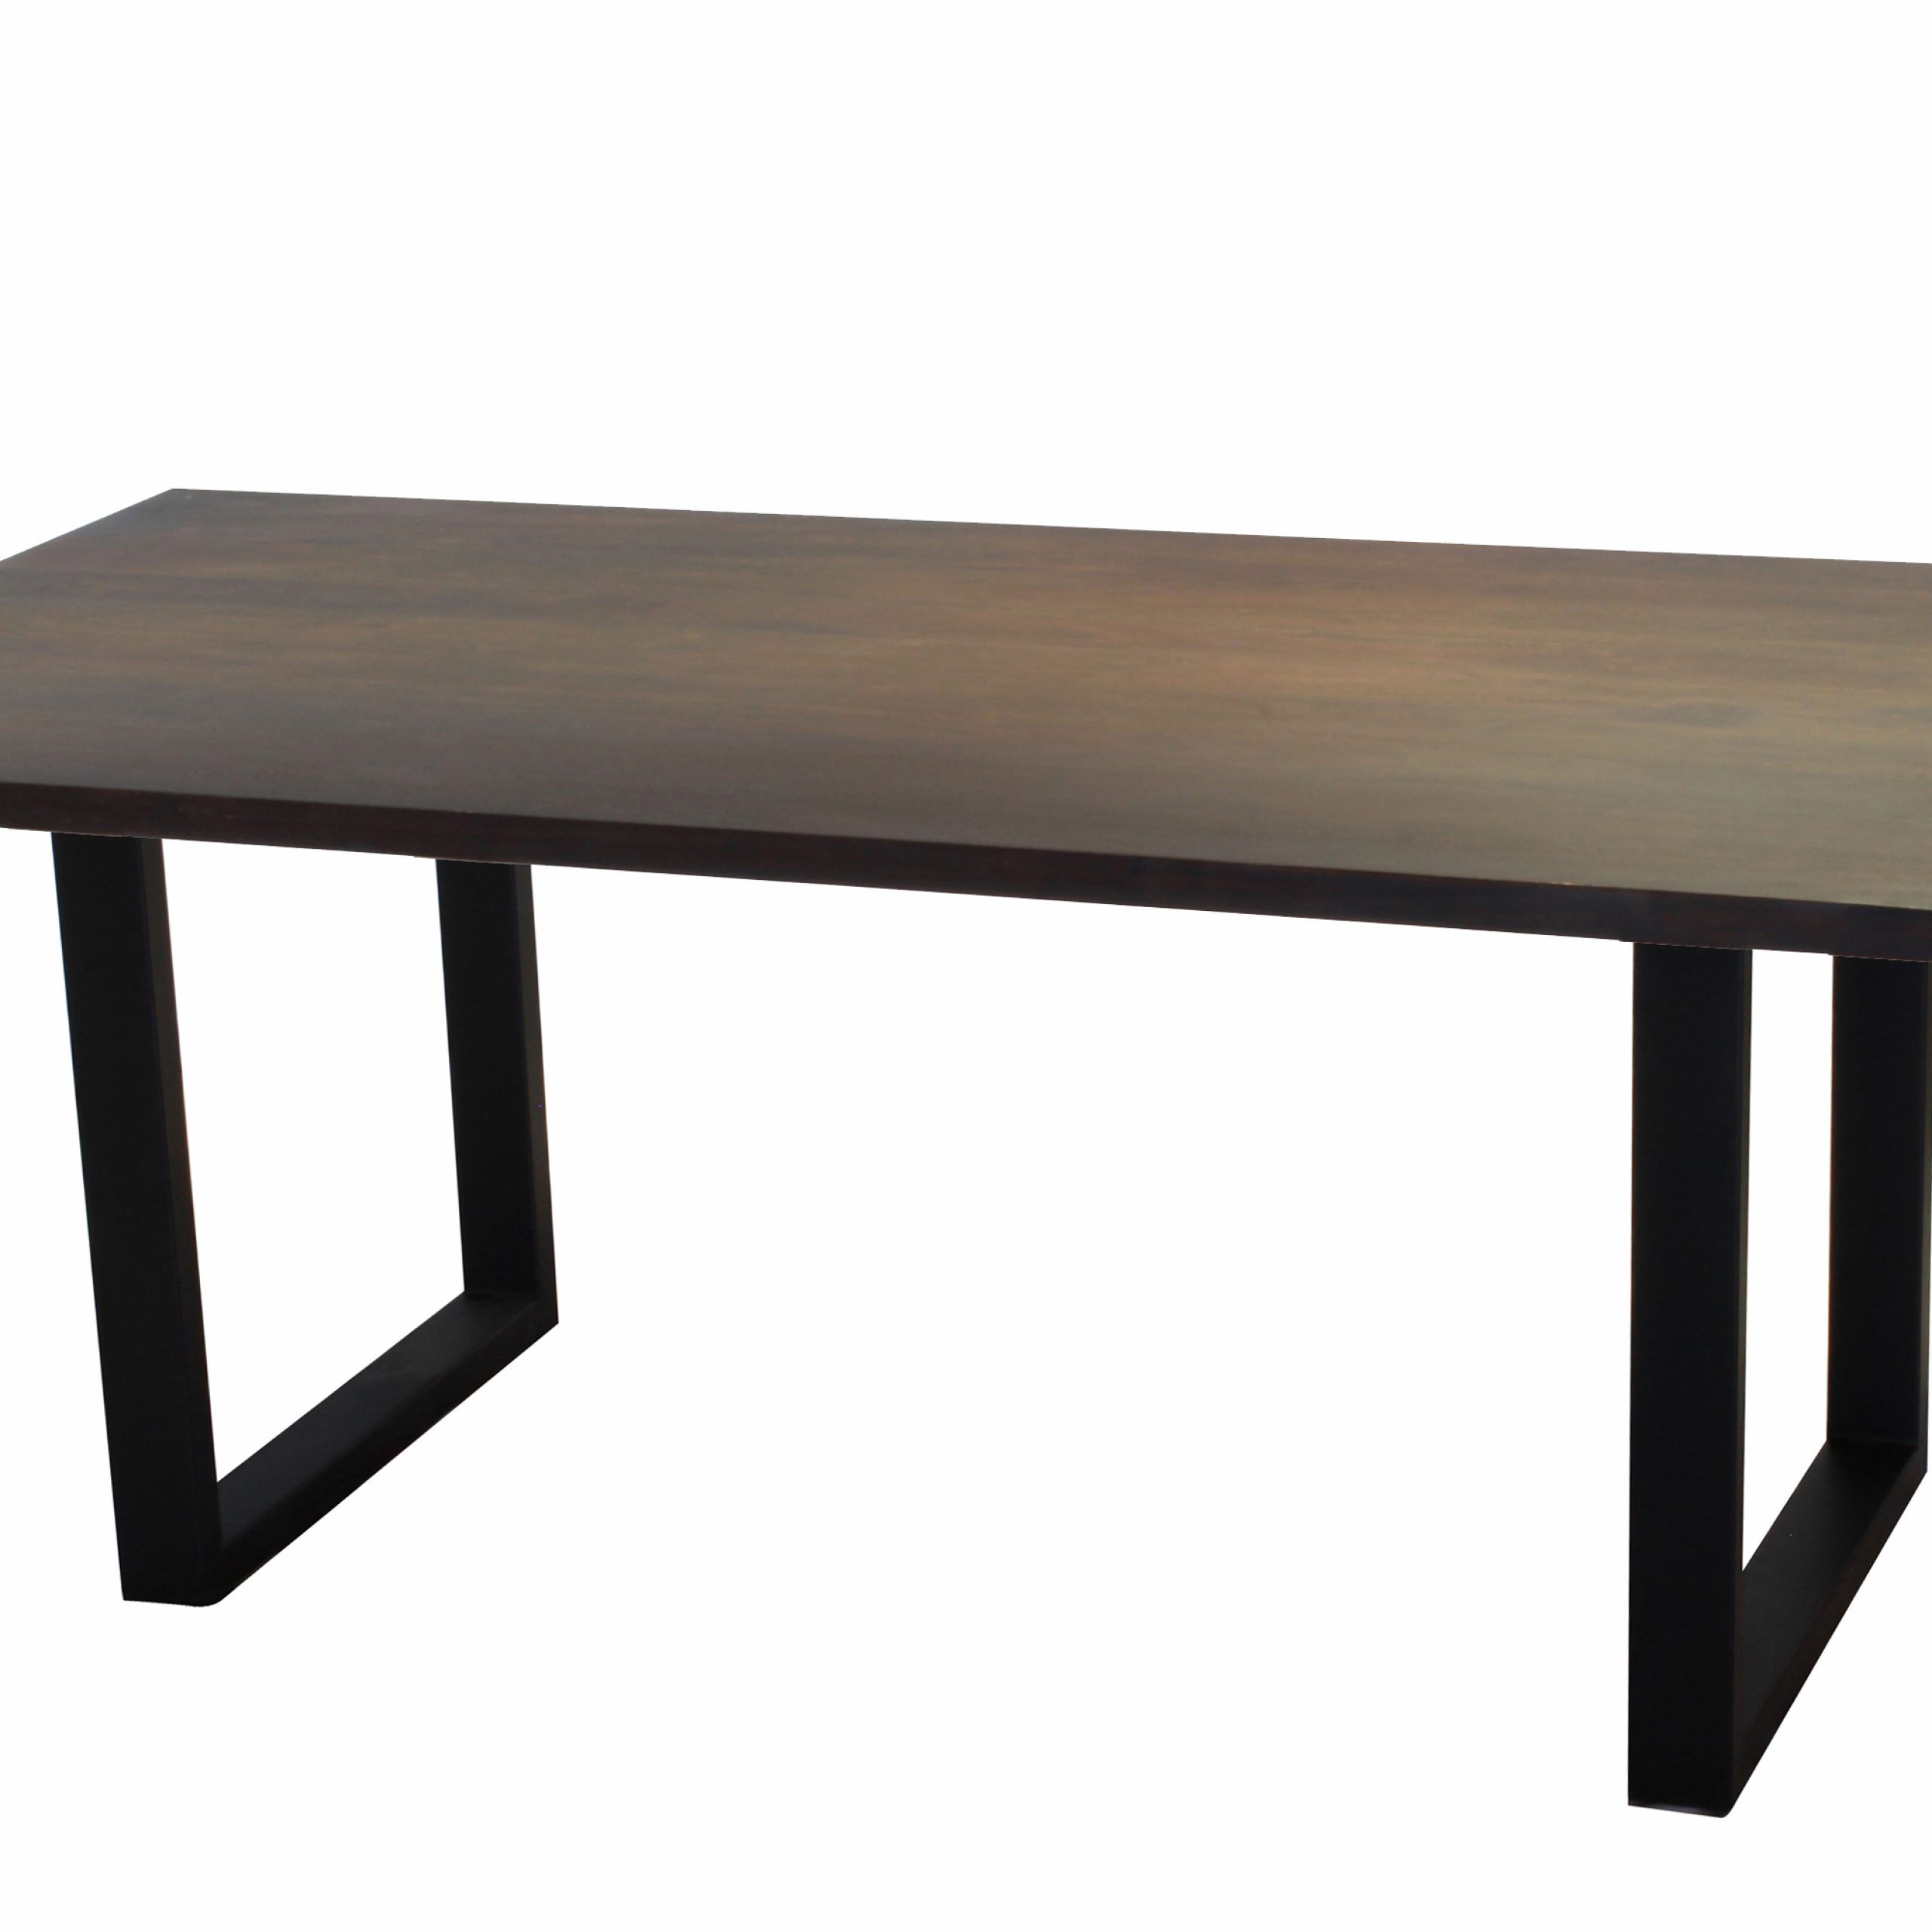 Best And Newest Corcoran Acacia Live Edge Dining Table With Black Victor Legs – 96" With Regard To Acacia Dining Tables With Black Victor Legs (View 3 of 30)